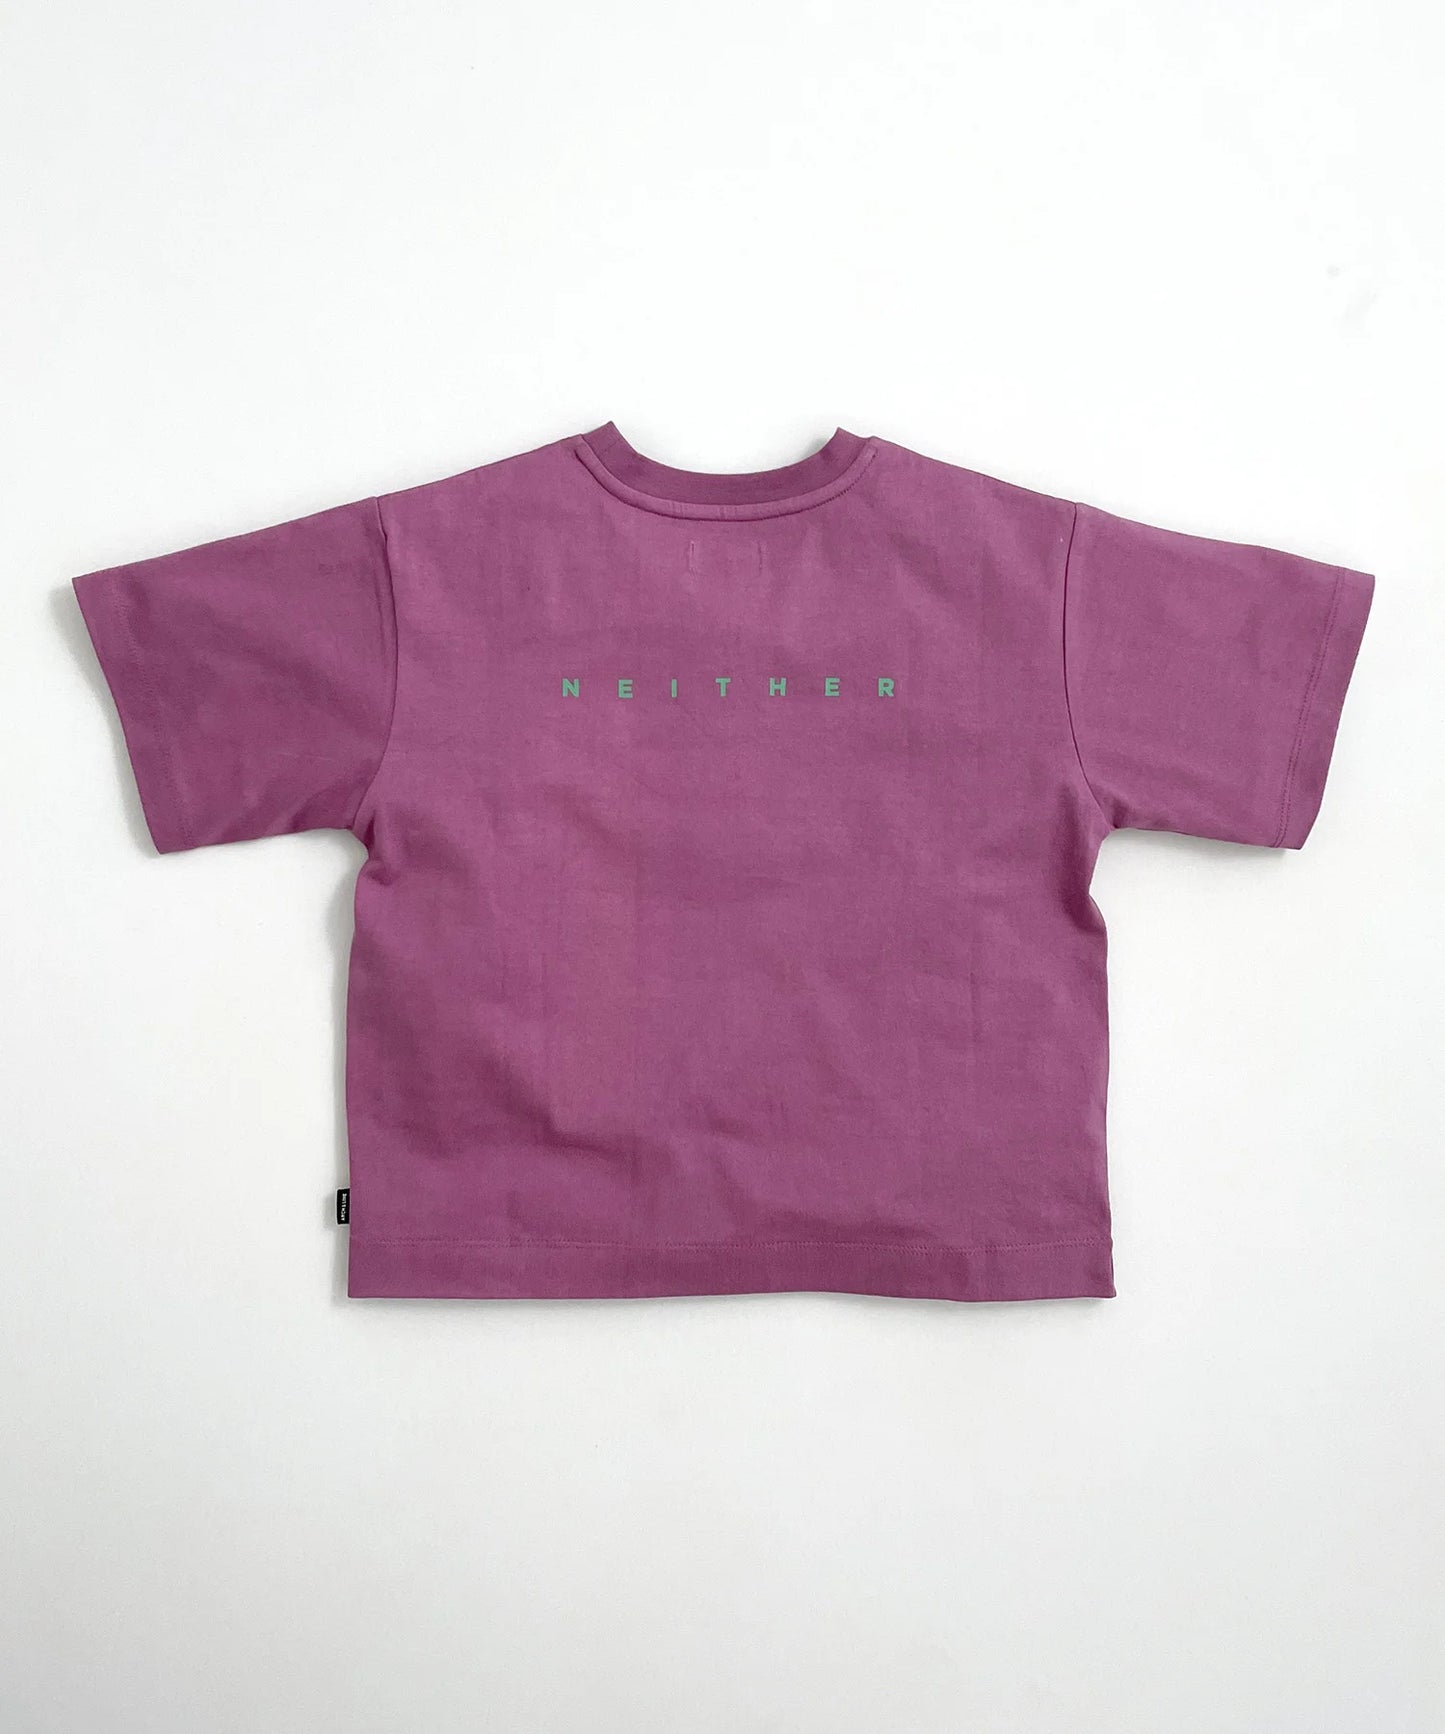 [Environmentally friendly material] OG COTTON Y/N TEE Organic cotton wide type [100-145cm]